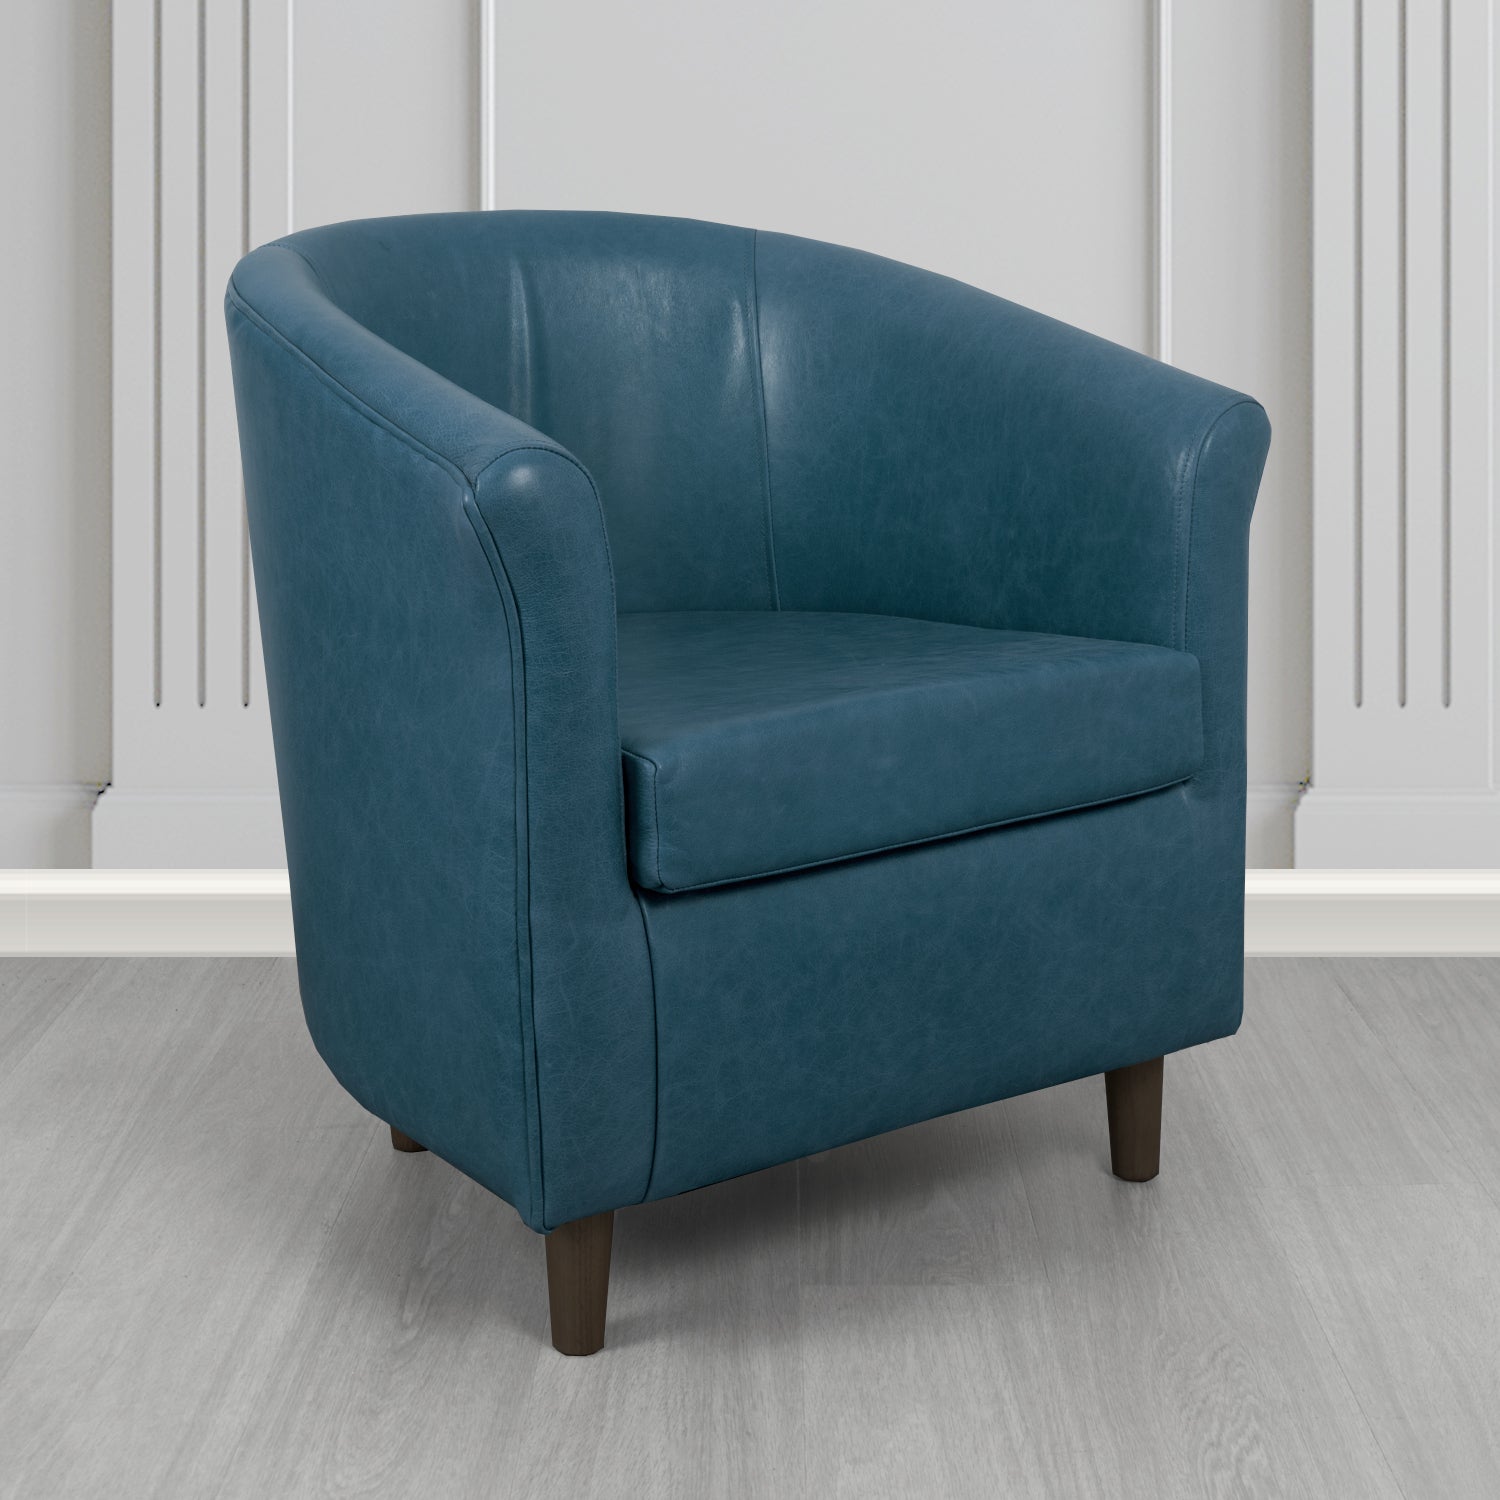 Tuscany Tub Chair in Crib 5 Old English Ocean Genuine Leather - The Tub Chair Shop